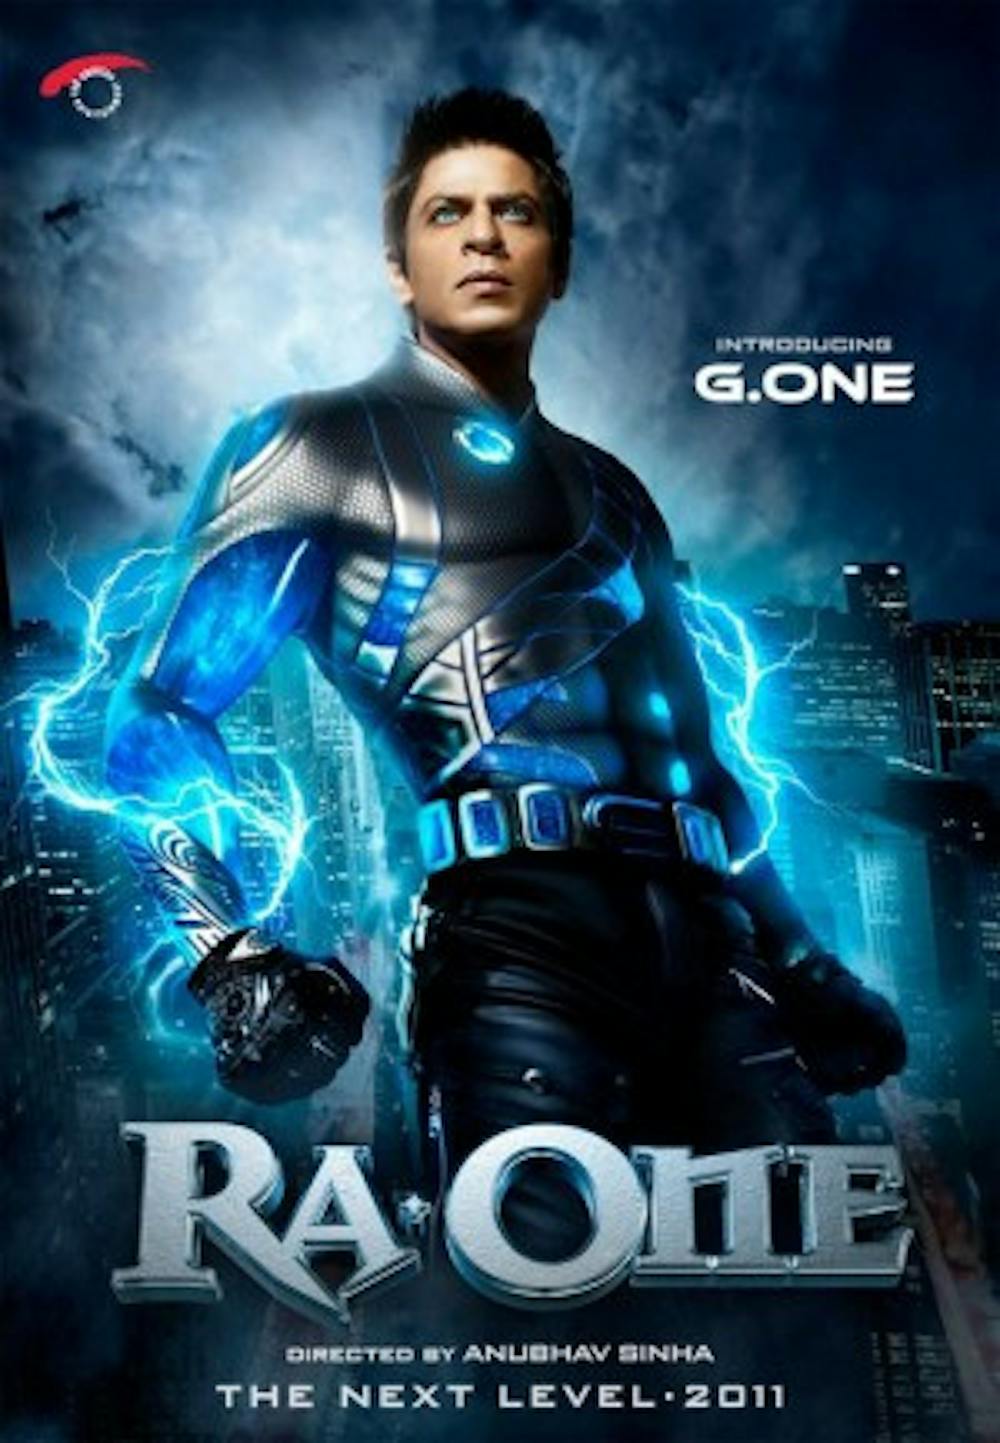 <p>"Ra.One" released Wednesday amid a swarm of hype. It delivers the action, visual effects and morality promised but suffers from some plot holes and a disjointed beginning.</p>